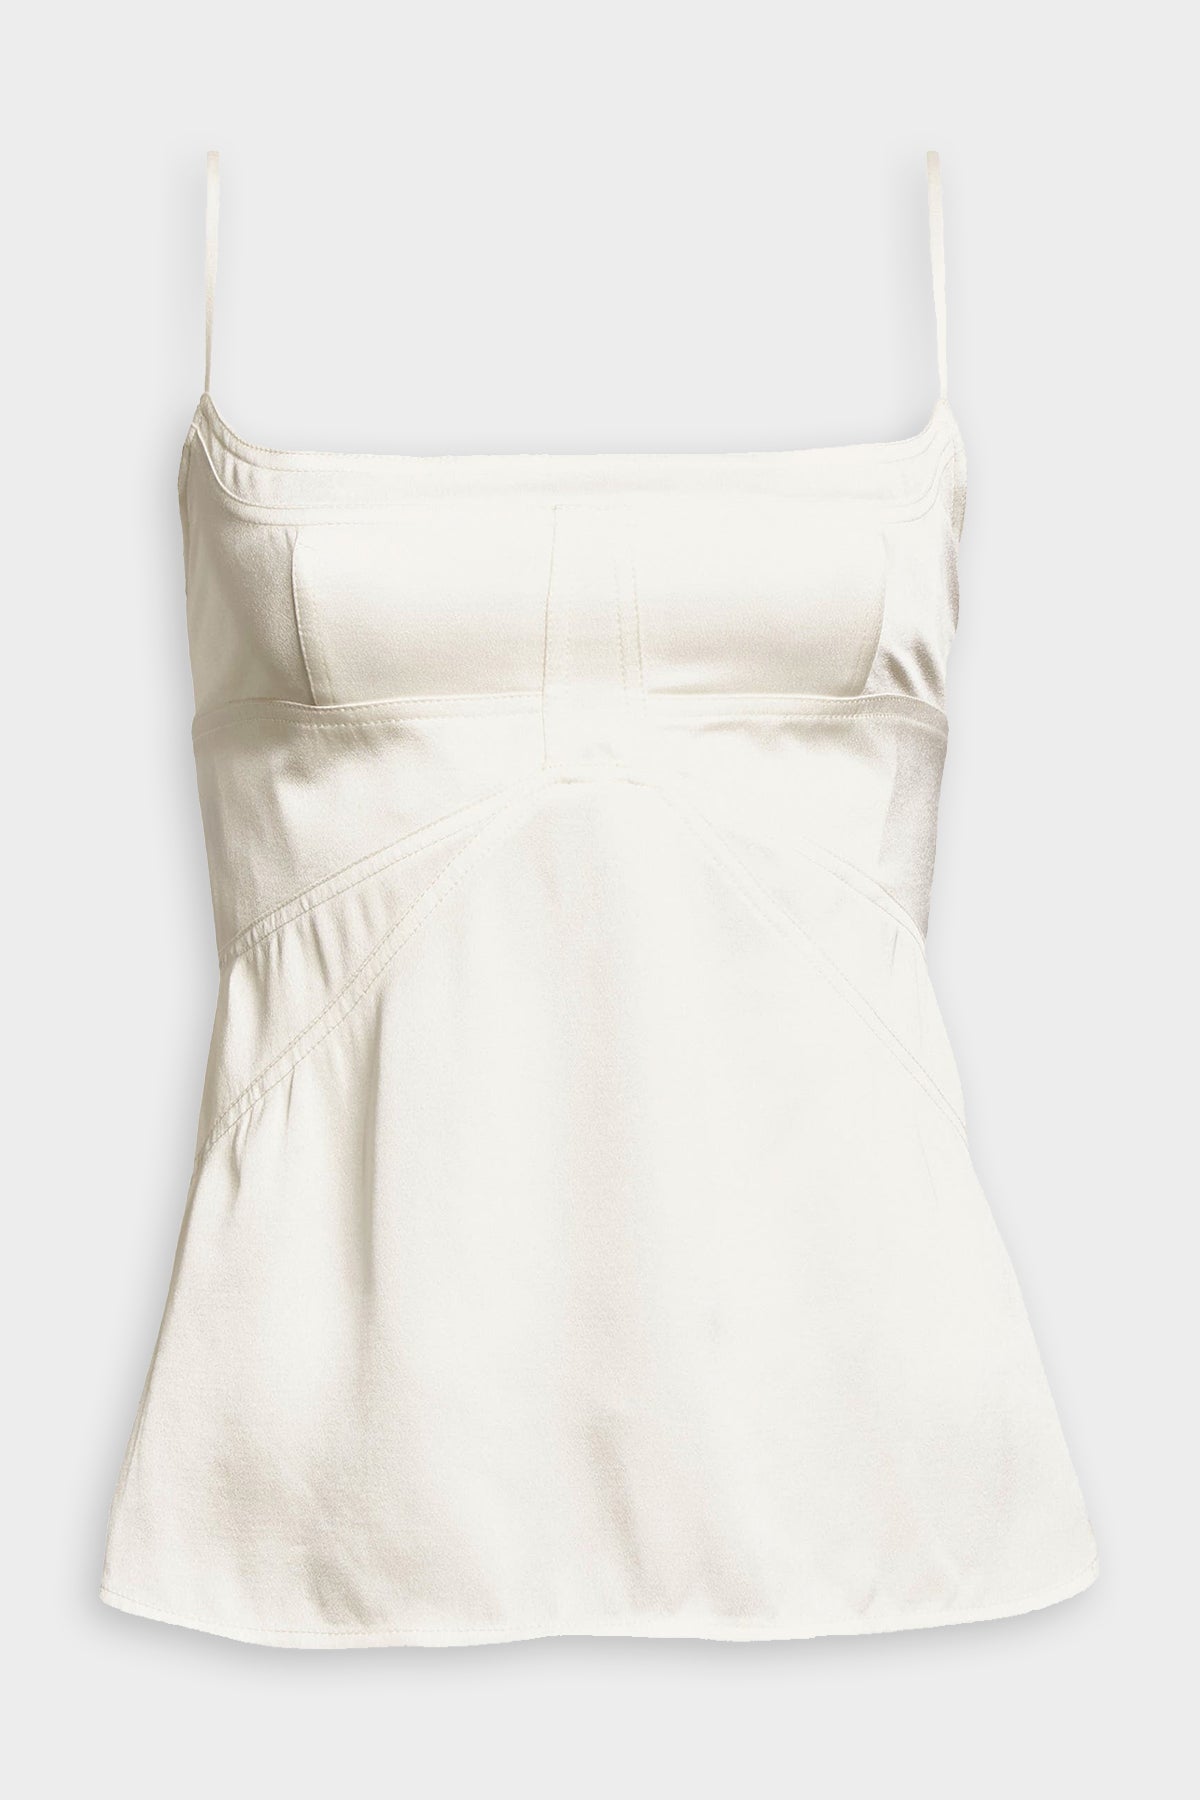 Harlow Top in Off White - shop-olivia.com